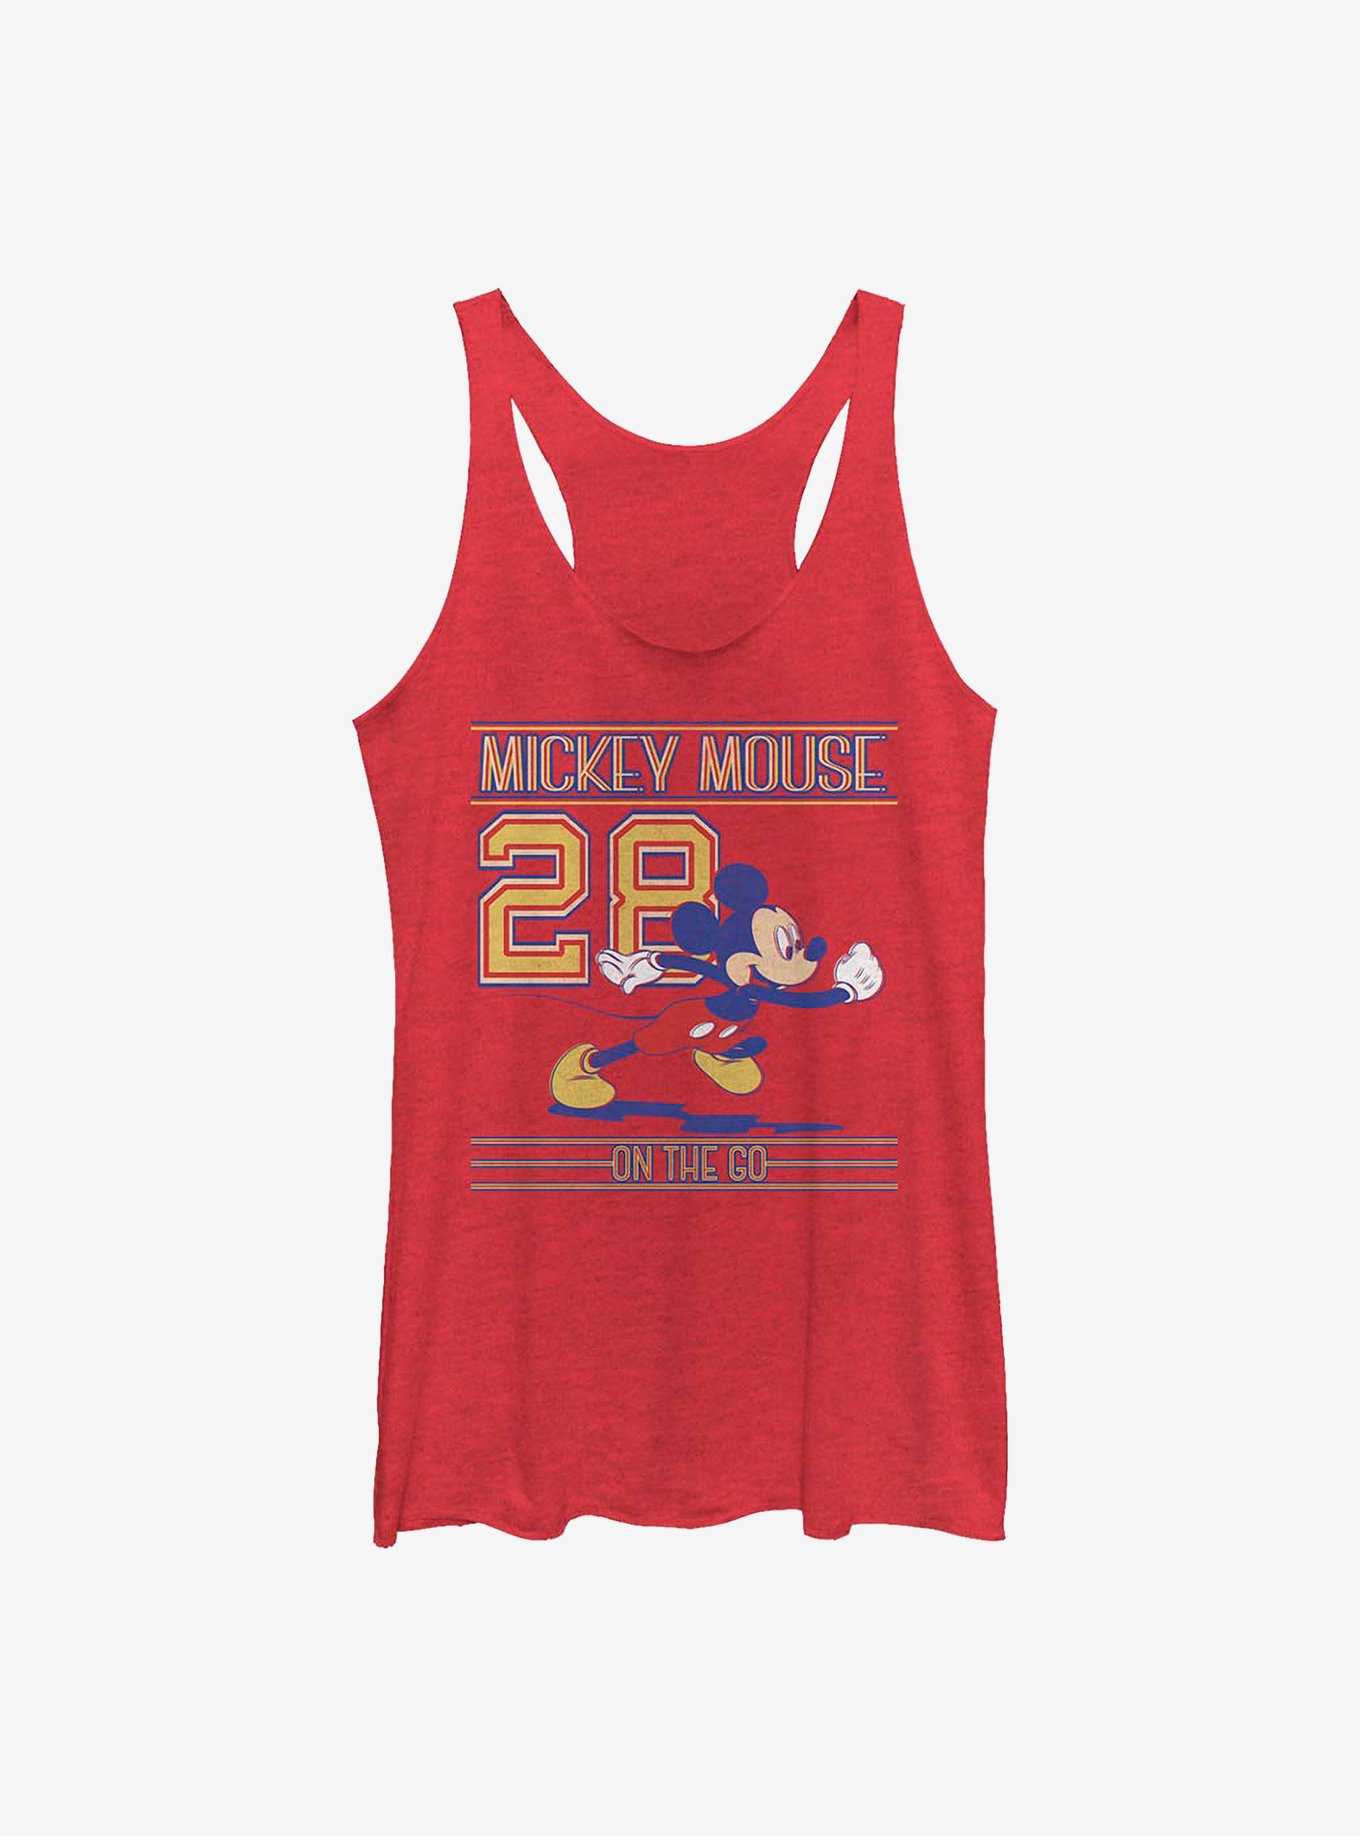 Disney Mickey Mouse Since 28 Womens Tank Top, , hi-res